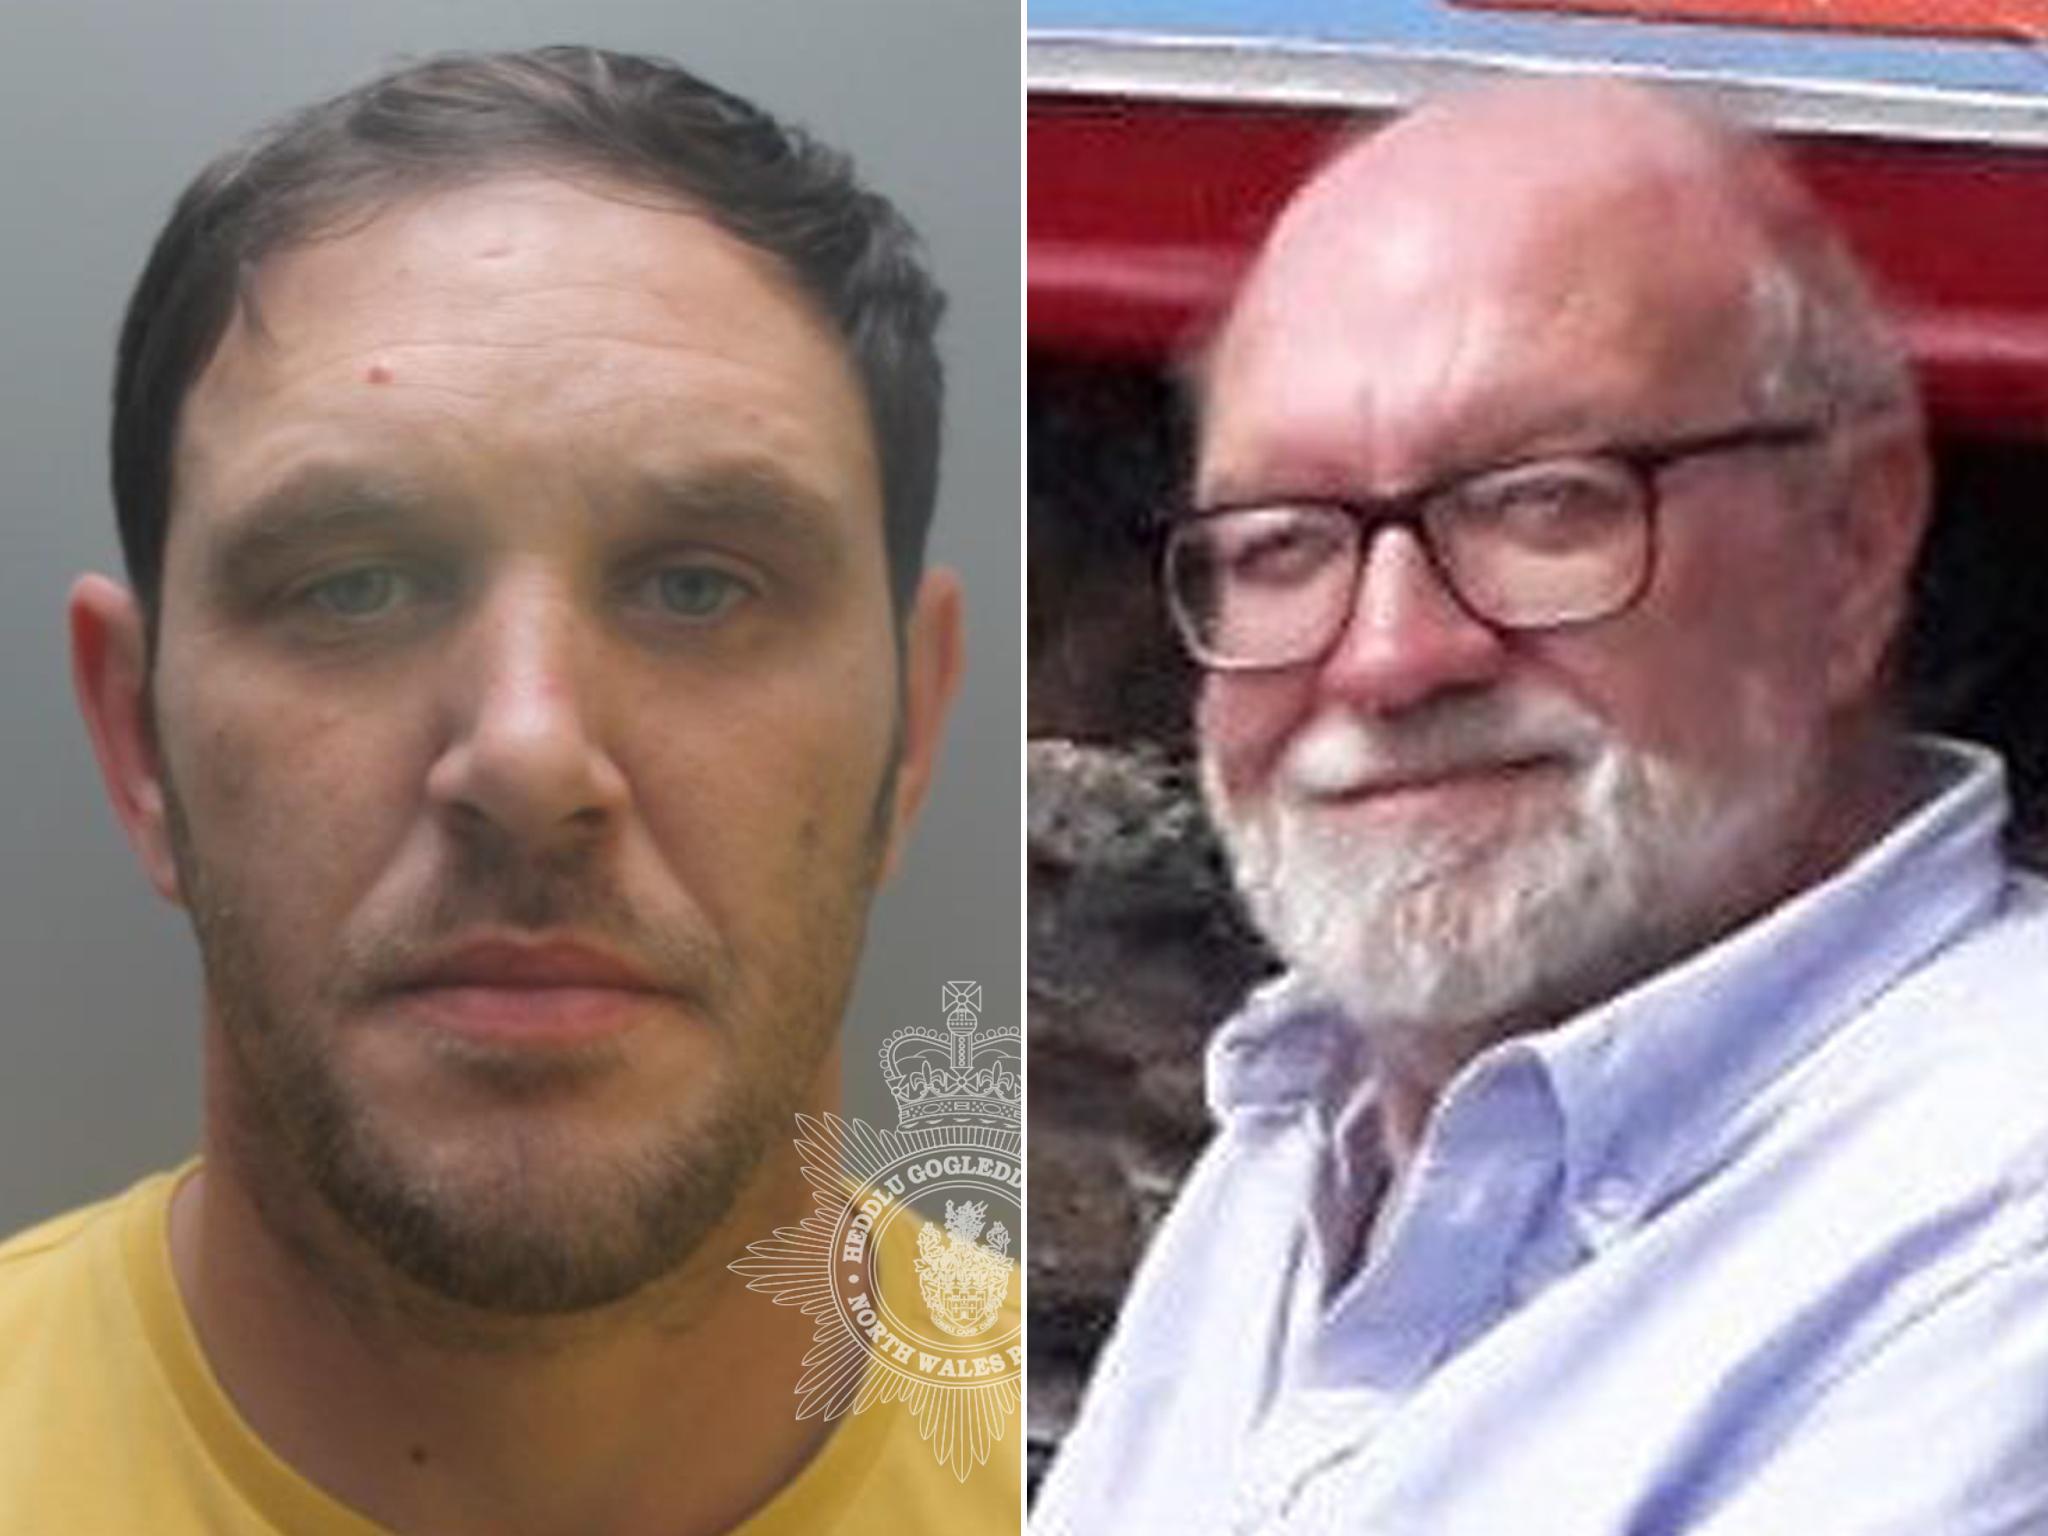 Man who killed pensioner with crossbow jailed for at least 31 years